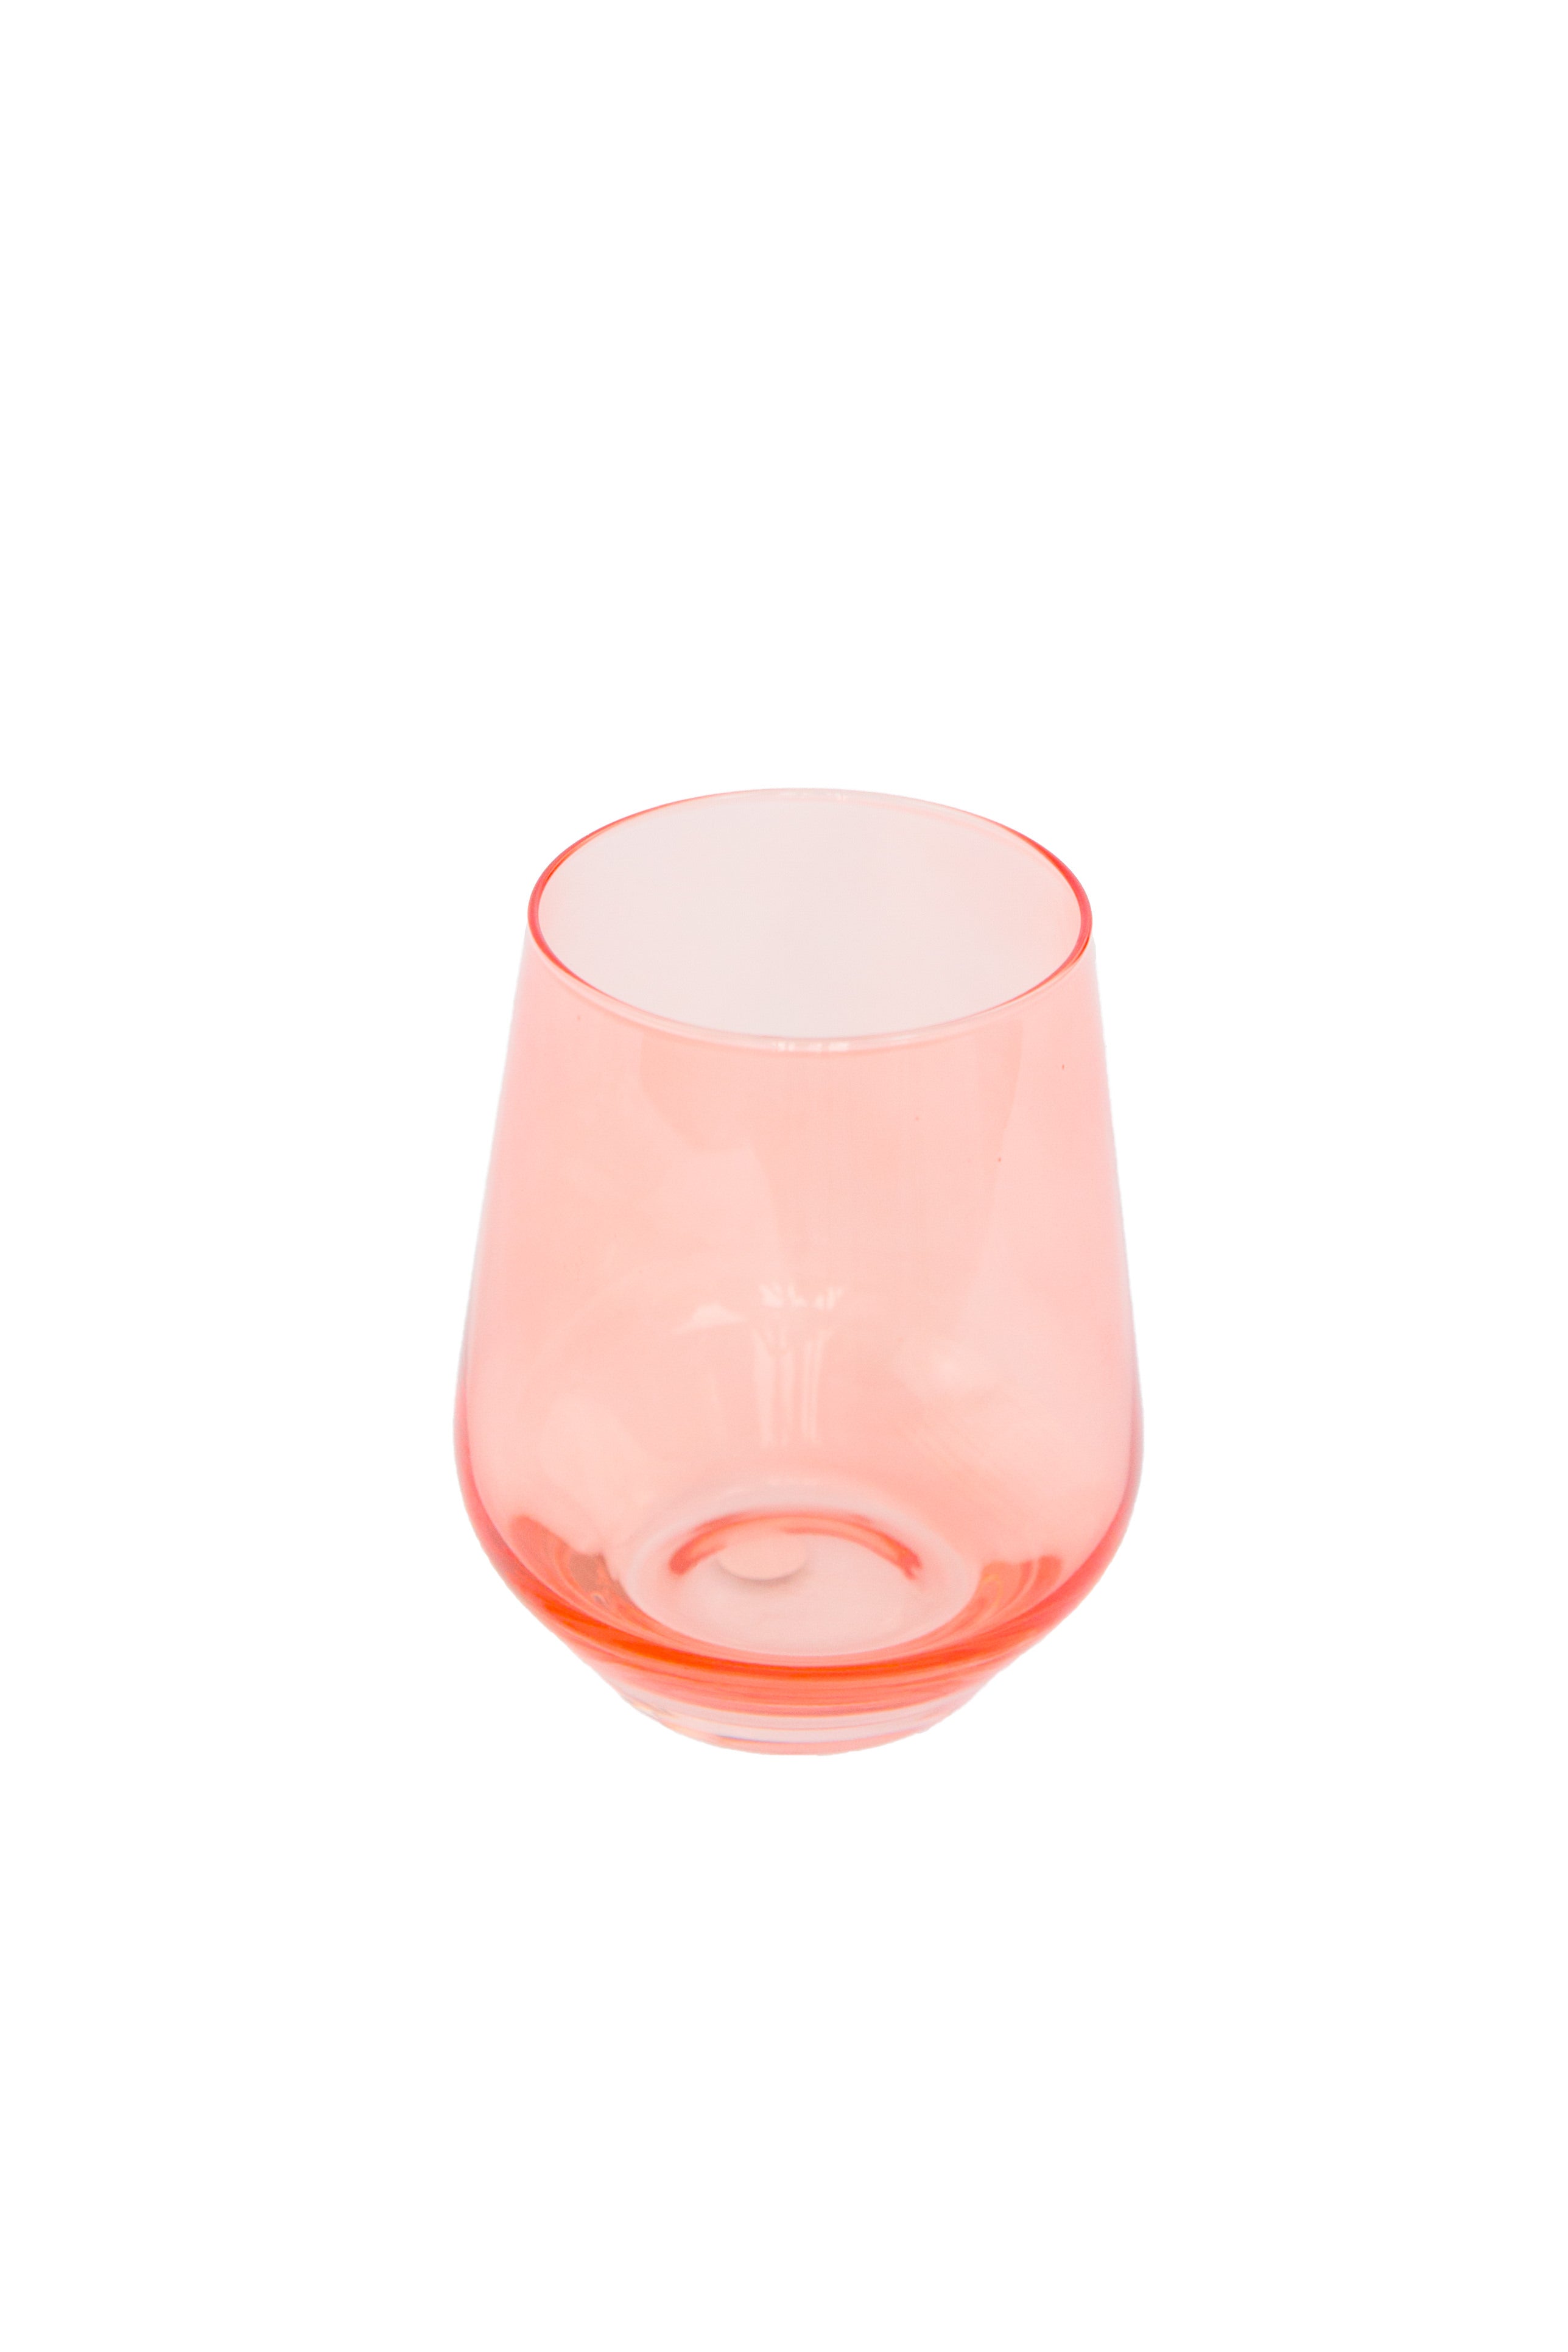 Estelle Colored Wine Stemless - Set of 2- Peach Fuzz {Our Coral Peach Pink}